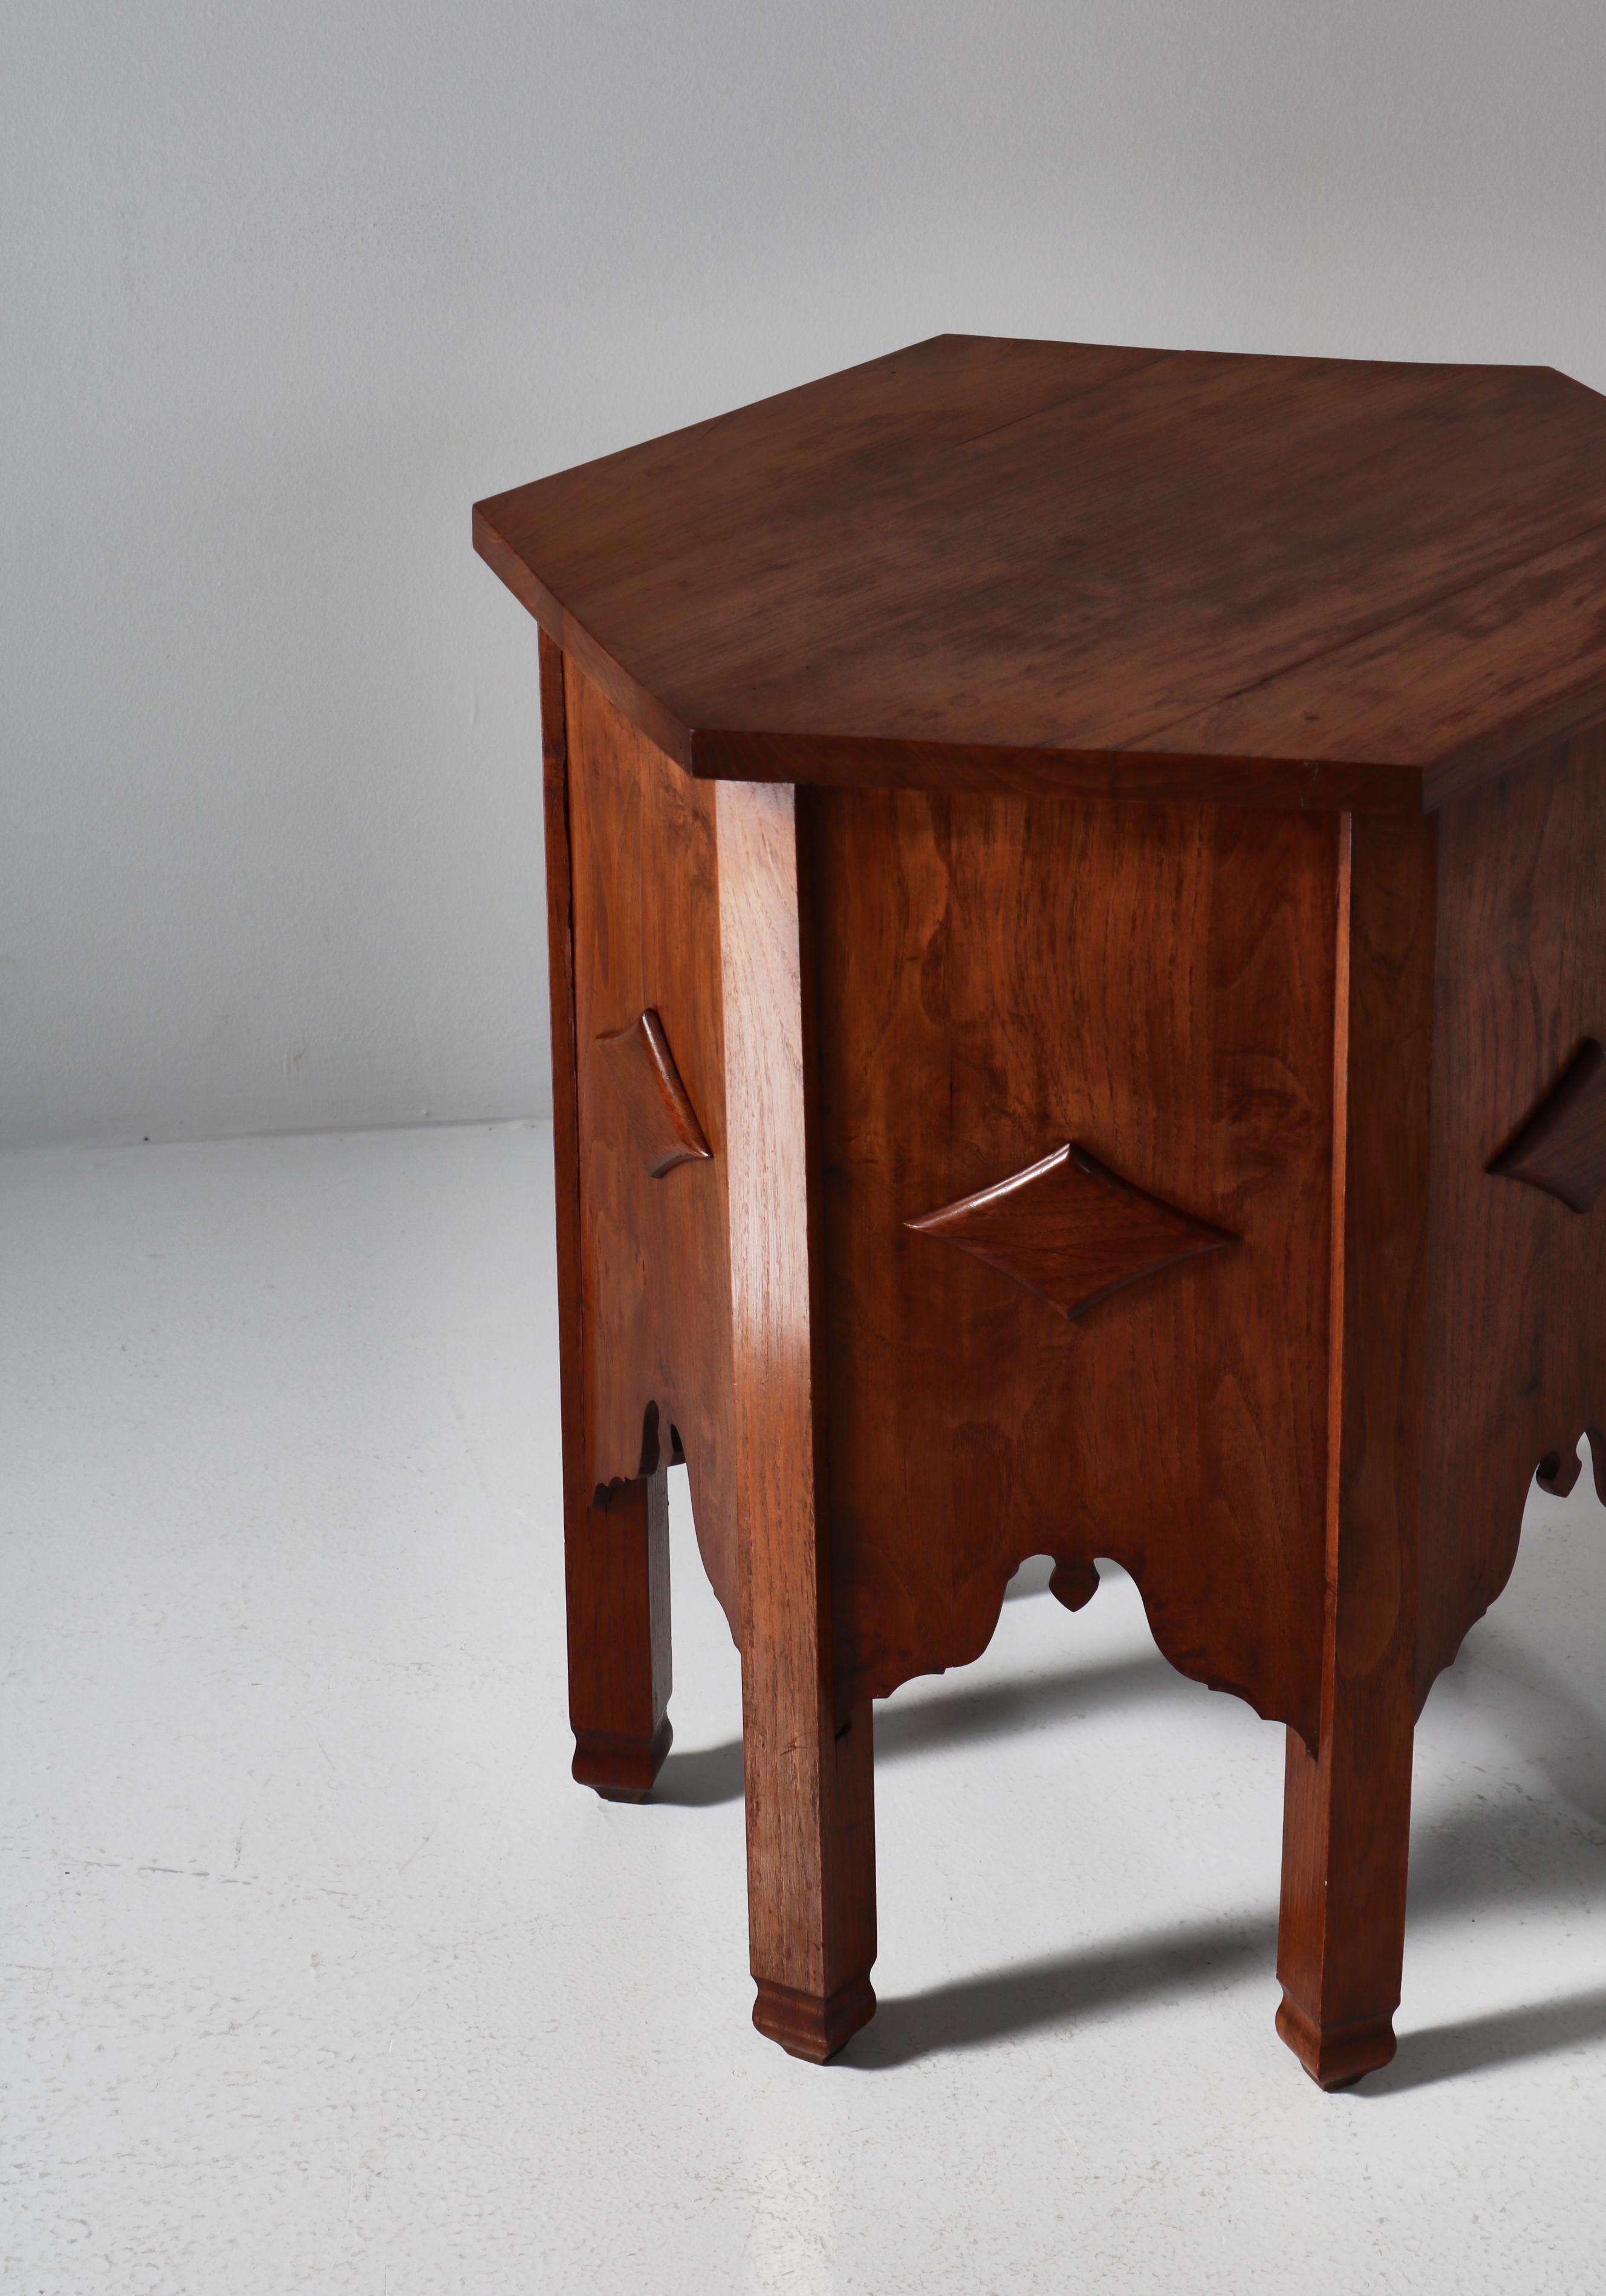 Mid-20th Century Art Nouveau Hexagonal Side Table by Danish Cabinetmaker, Carved Elm Tree, 1930s For Sale